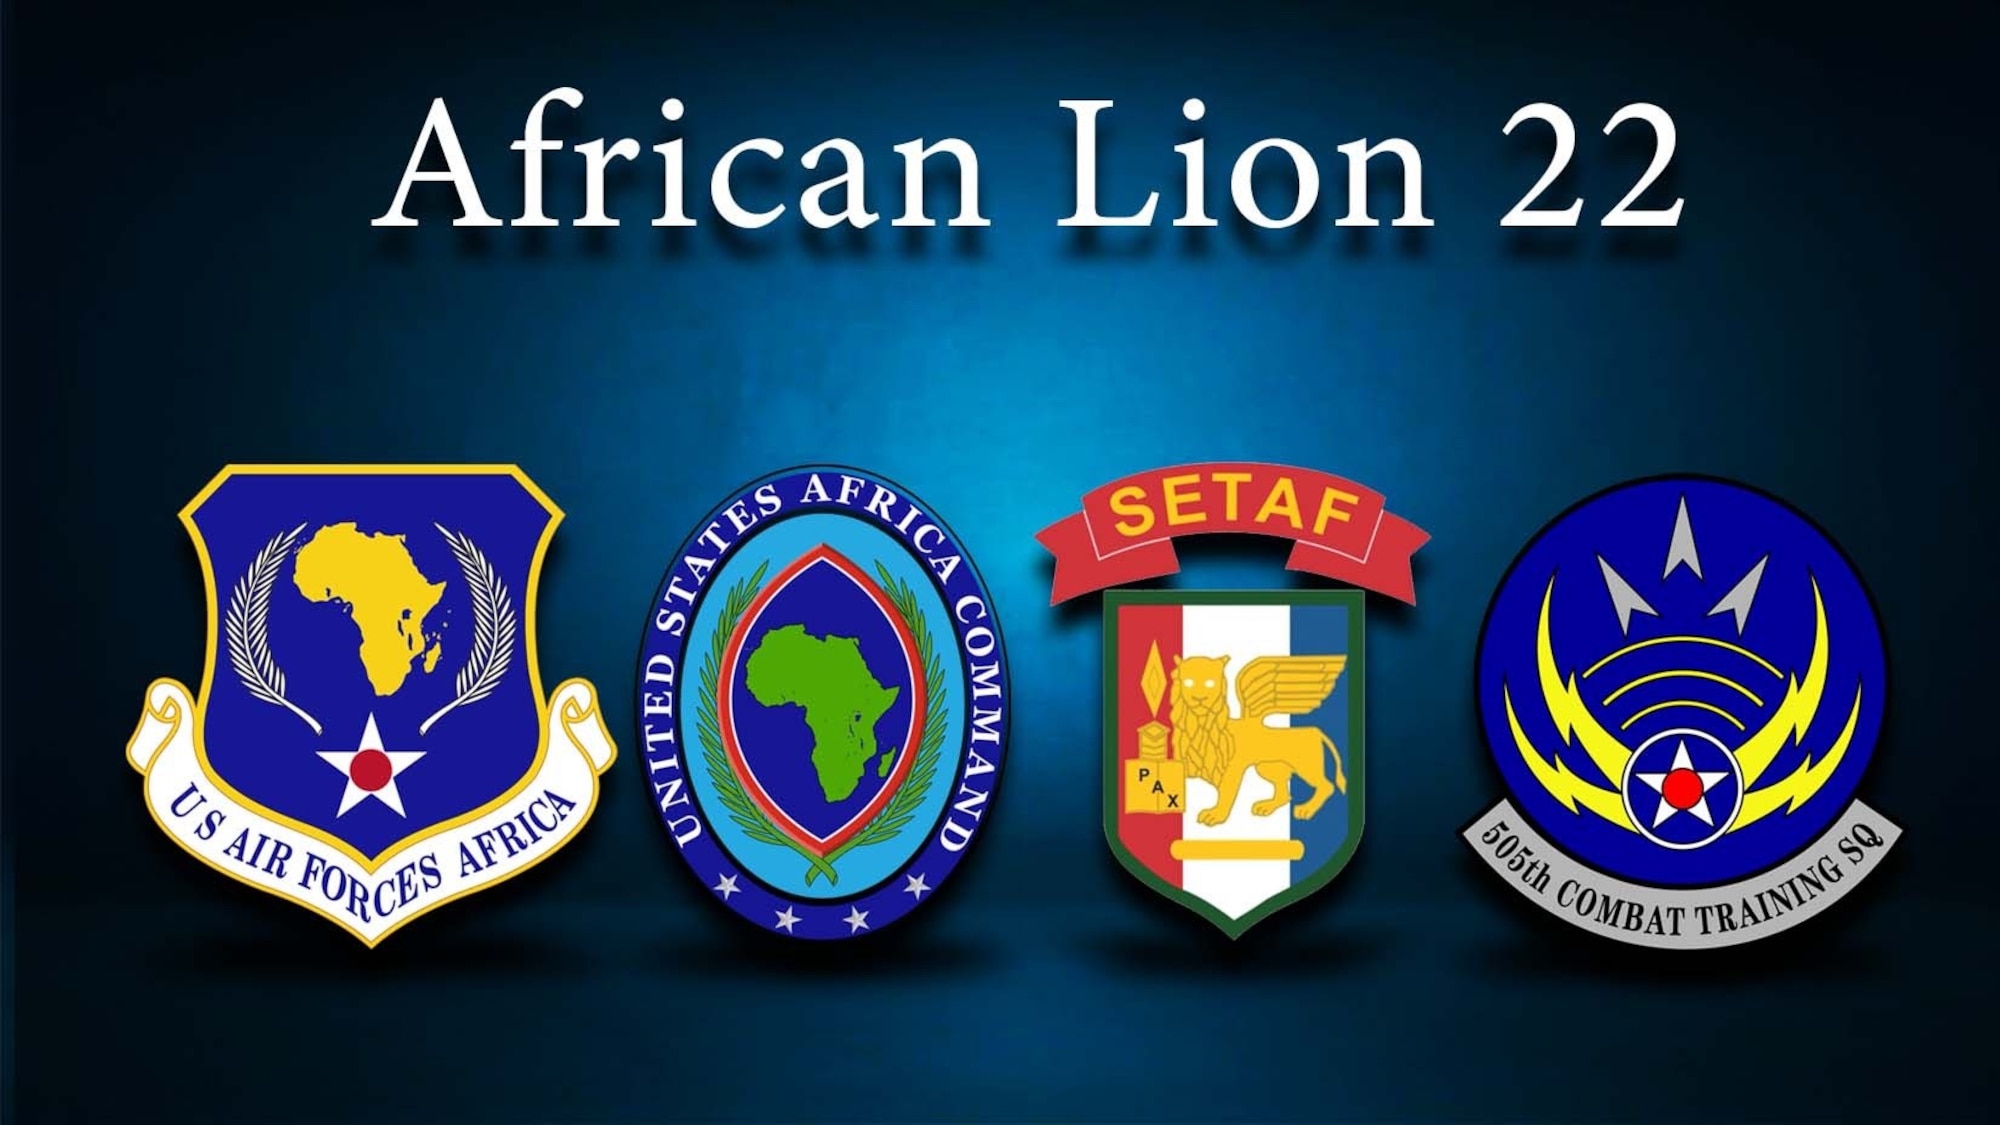 graphic for exercise African Lion with emblems from 505th Combat Training Squadron, USAFE, USAFRICOM, and SETAF on a blue background.